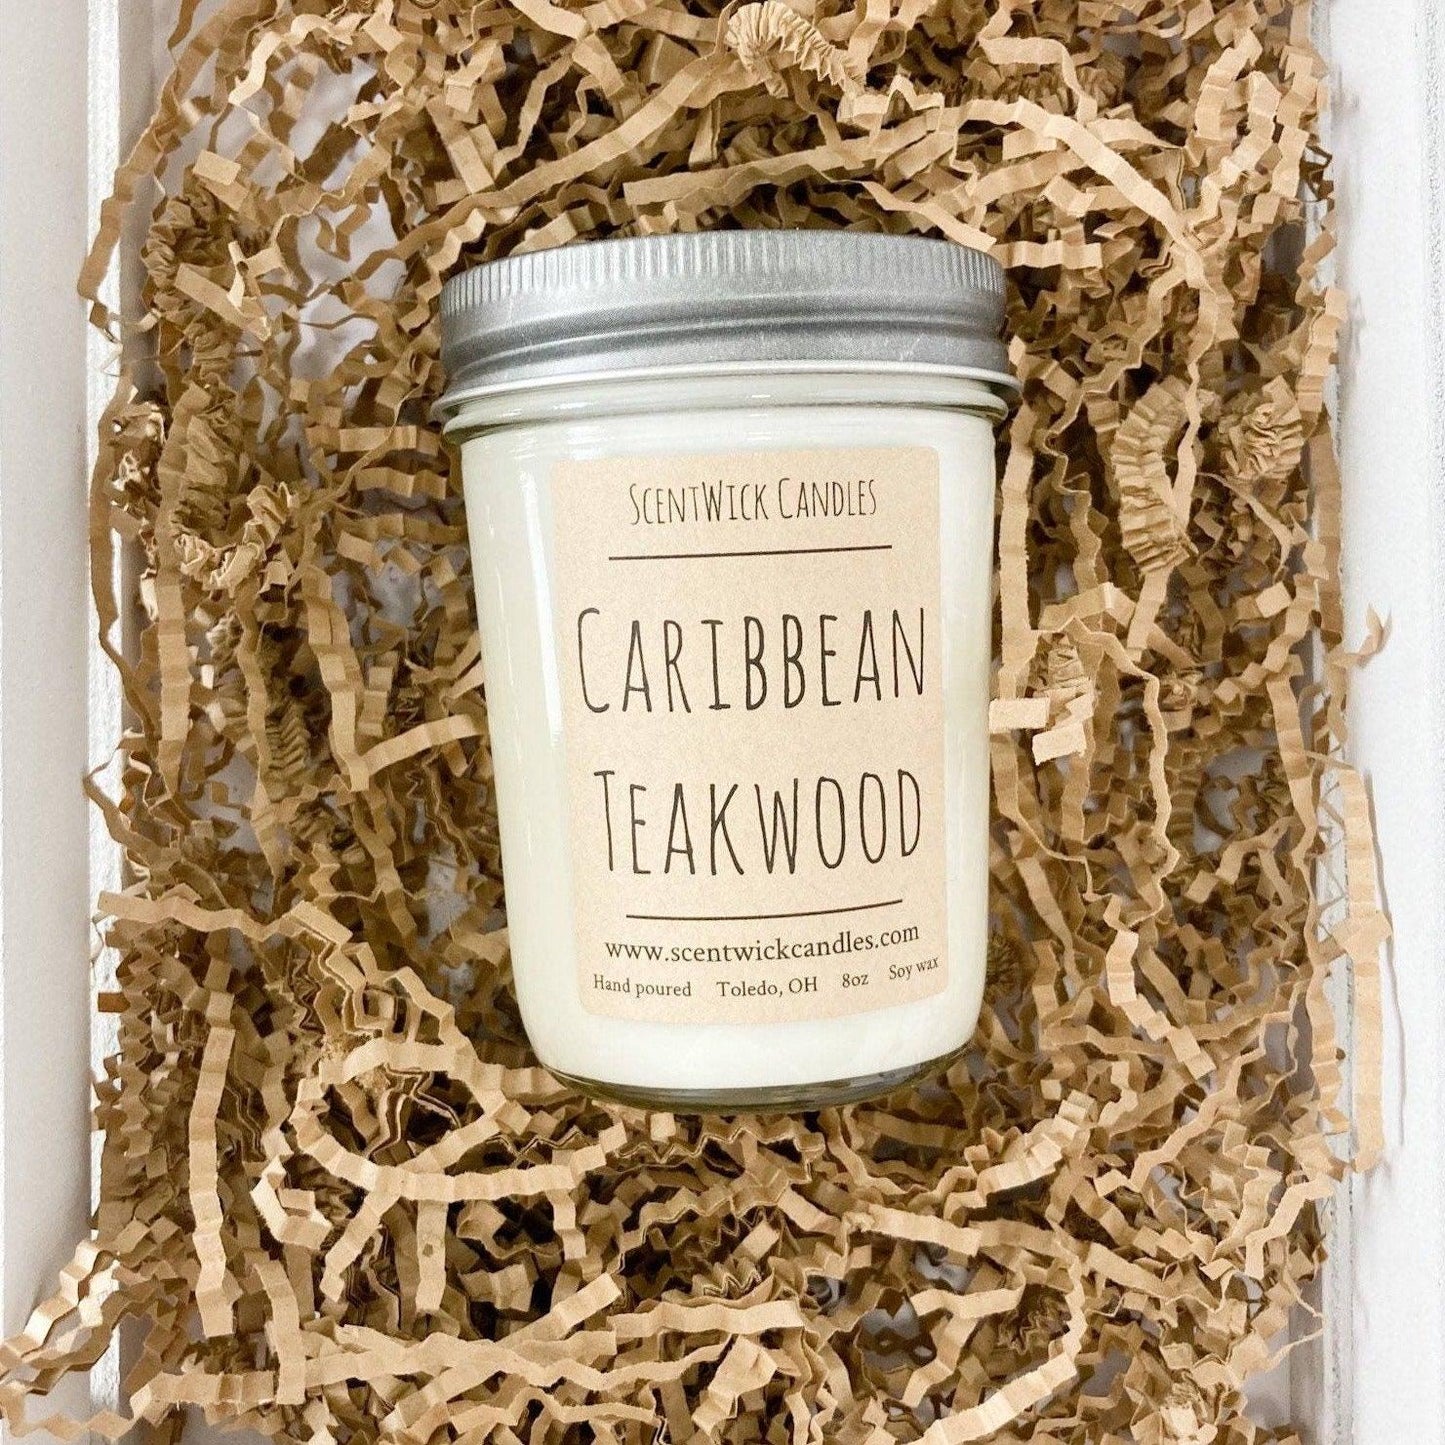 Caribbean Teakwood Candle - ScentWick Candles